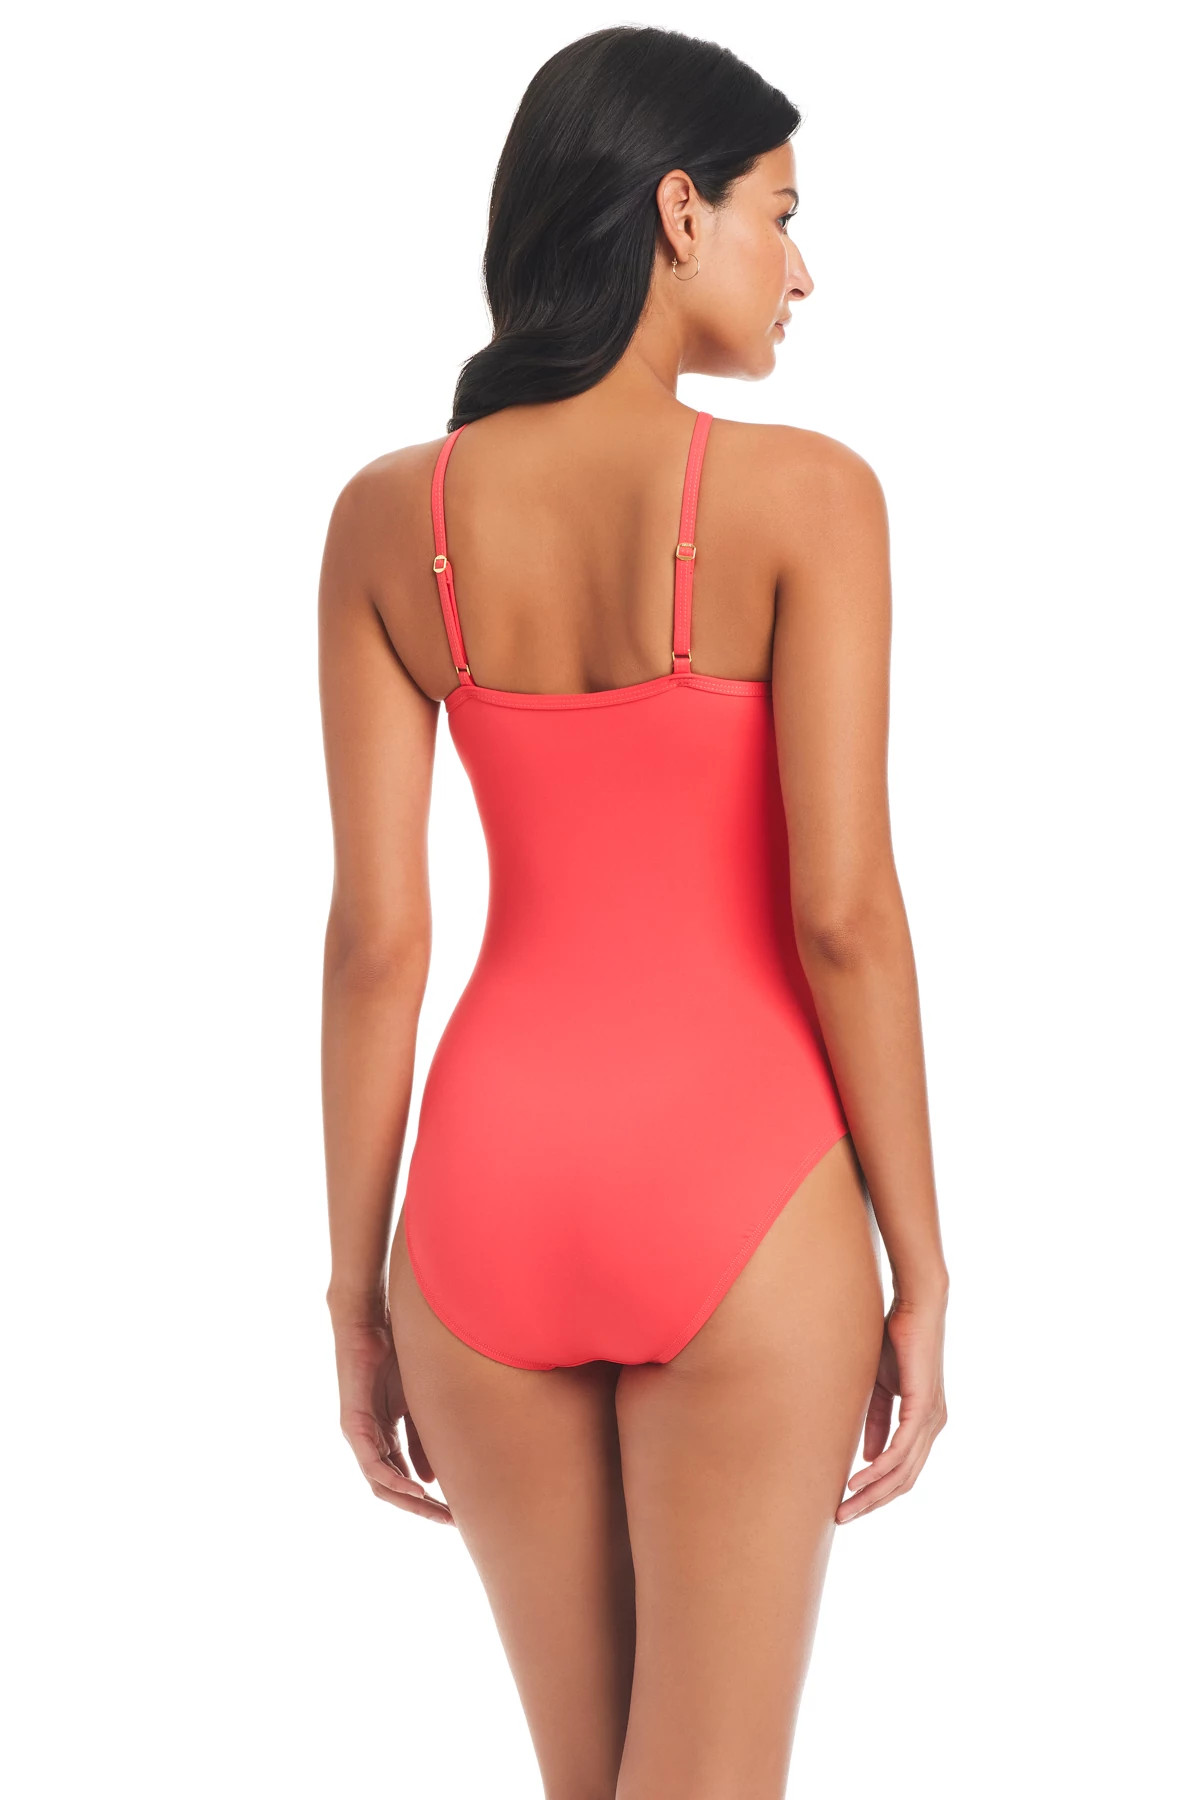 SHORTCAKE High Neck One Piece Swimsuit image number 2